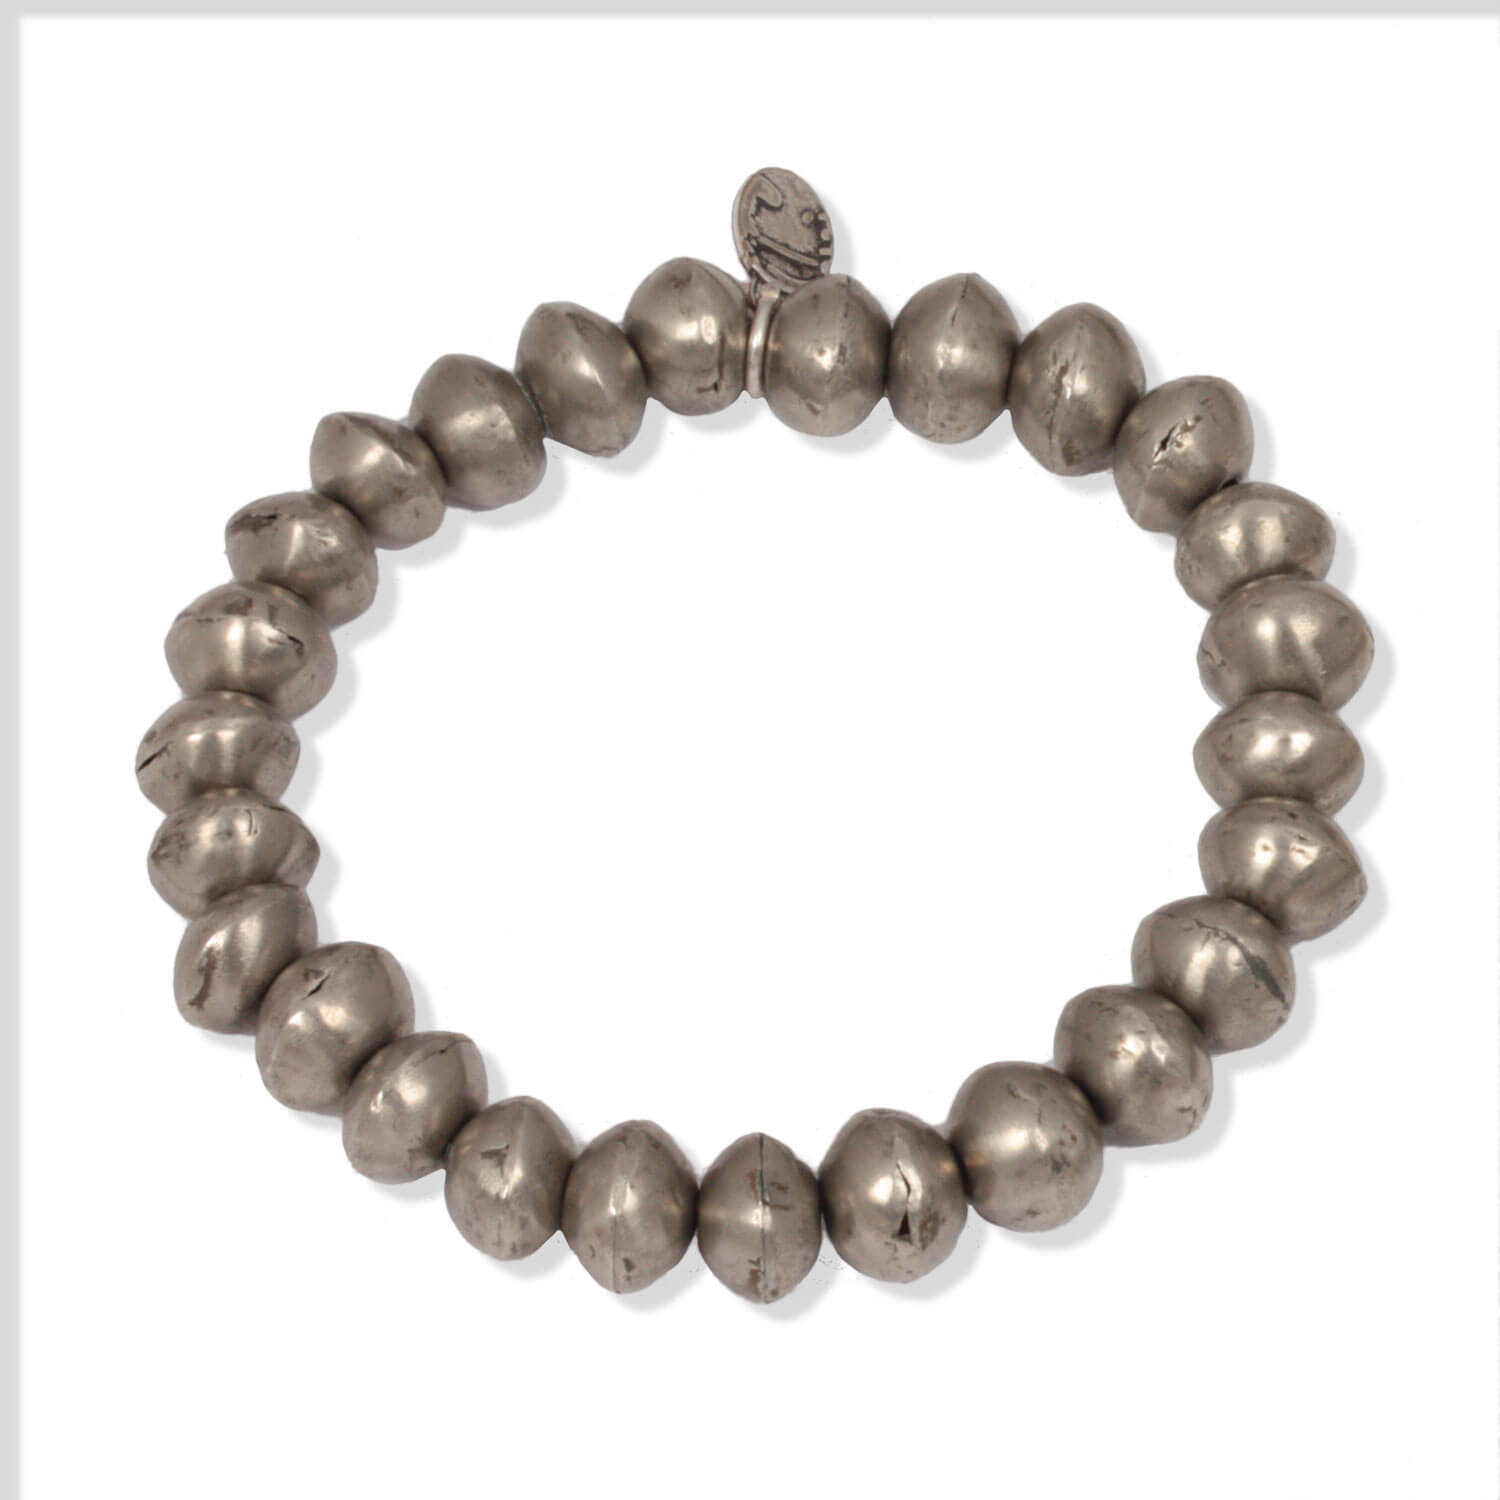 Silver Tuareg Beads - Bracelet according to a millennia-old tradition